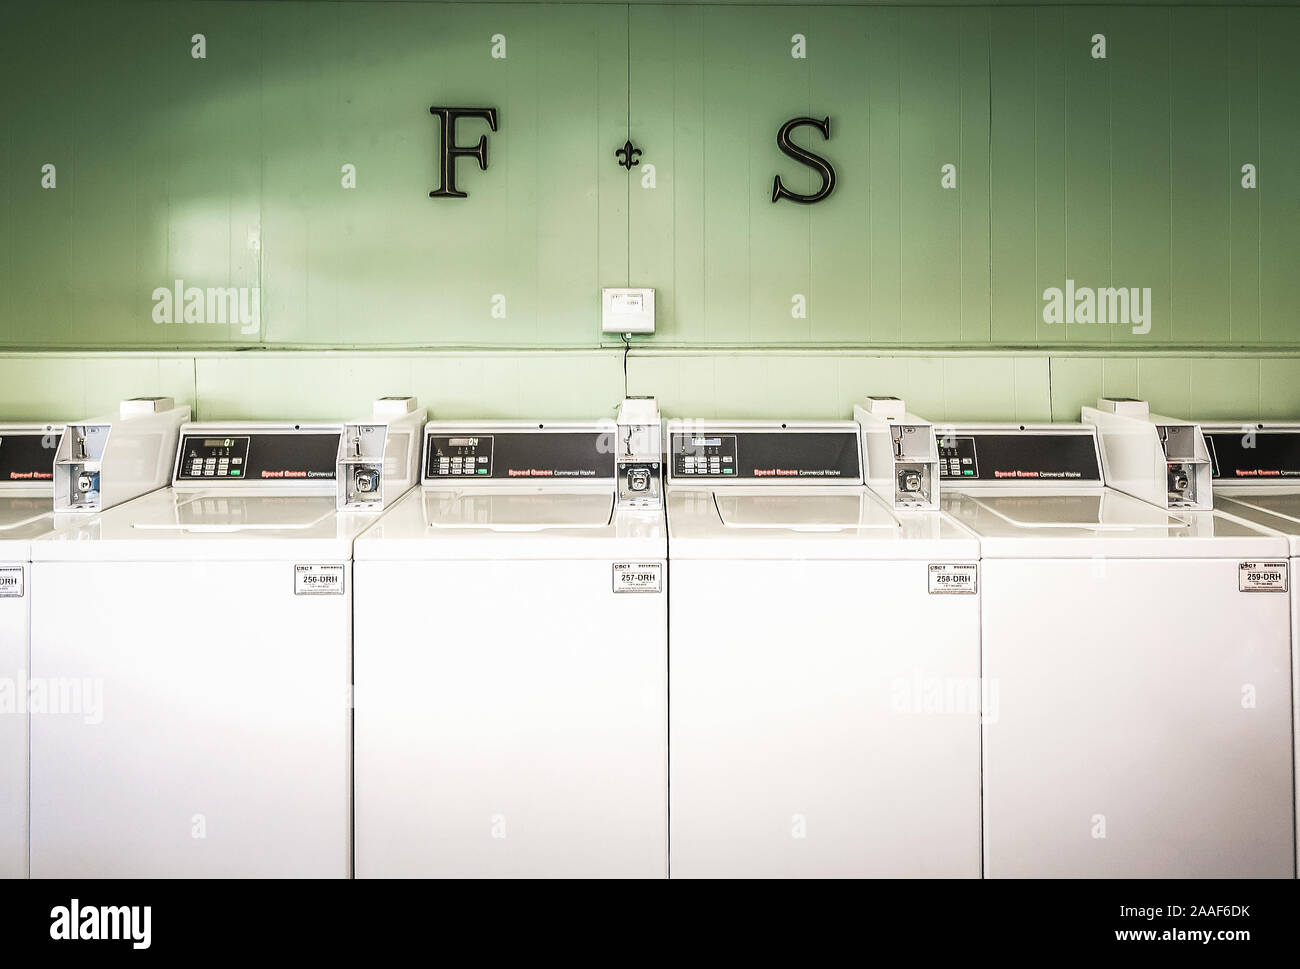 Washing machines are pictured in the laundry room at Four Seasons apartments in Mobile, Alabama. The apartment complex is managed by Sealy Management. Stock Photo